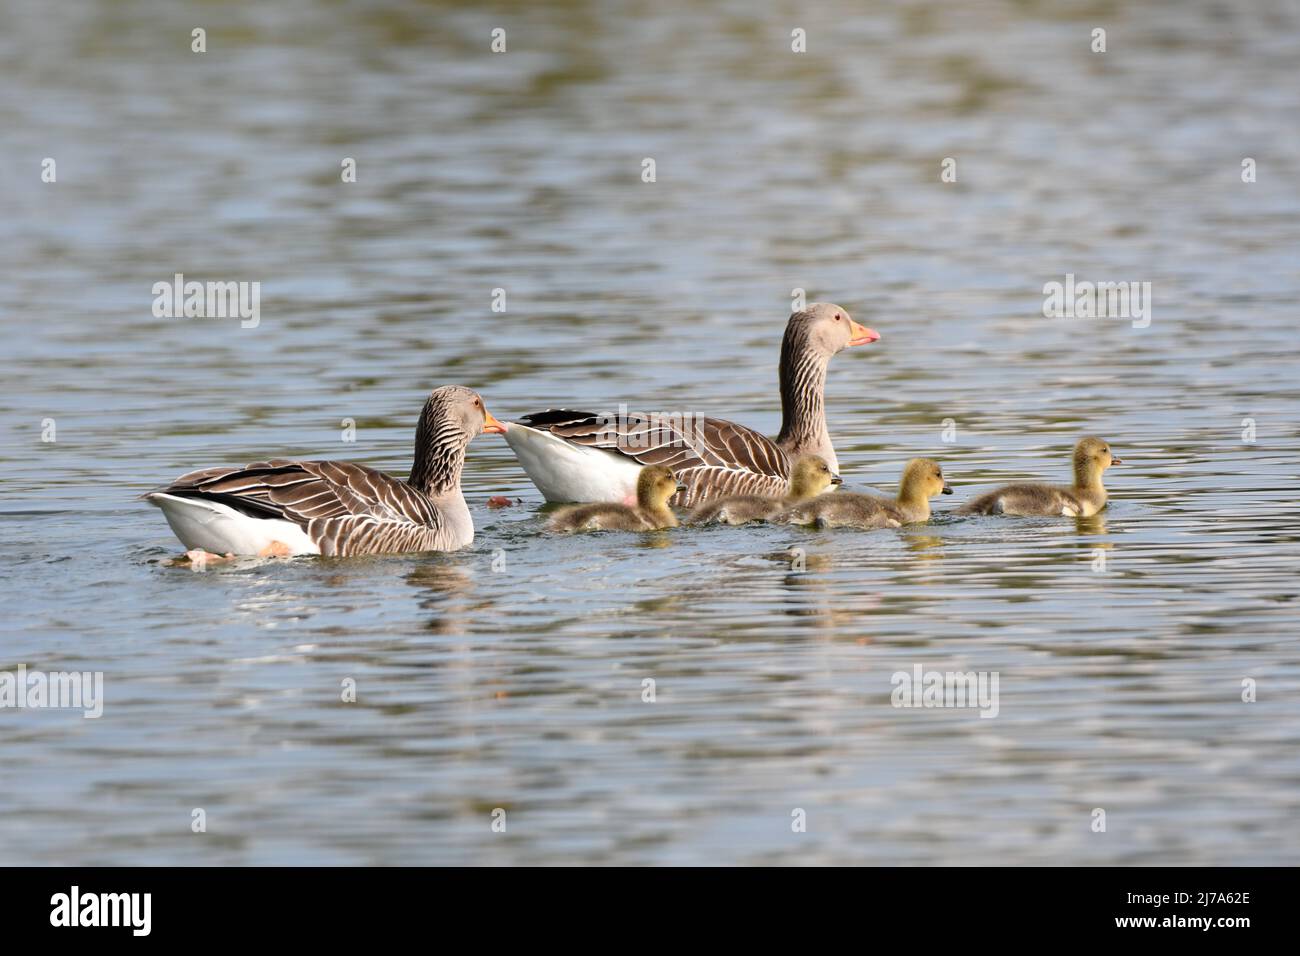 Spring at Tring Reservoirs. The birds have babies. Greylag geese with four goslings. Stock Photo